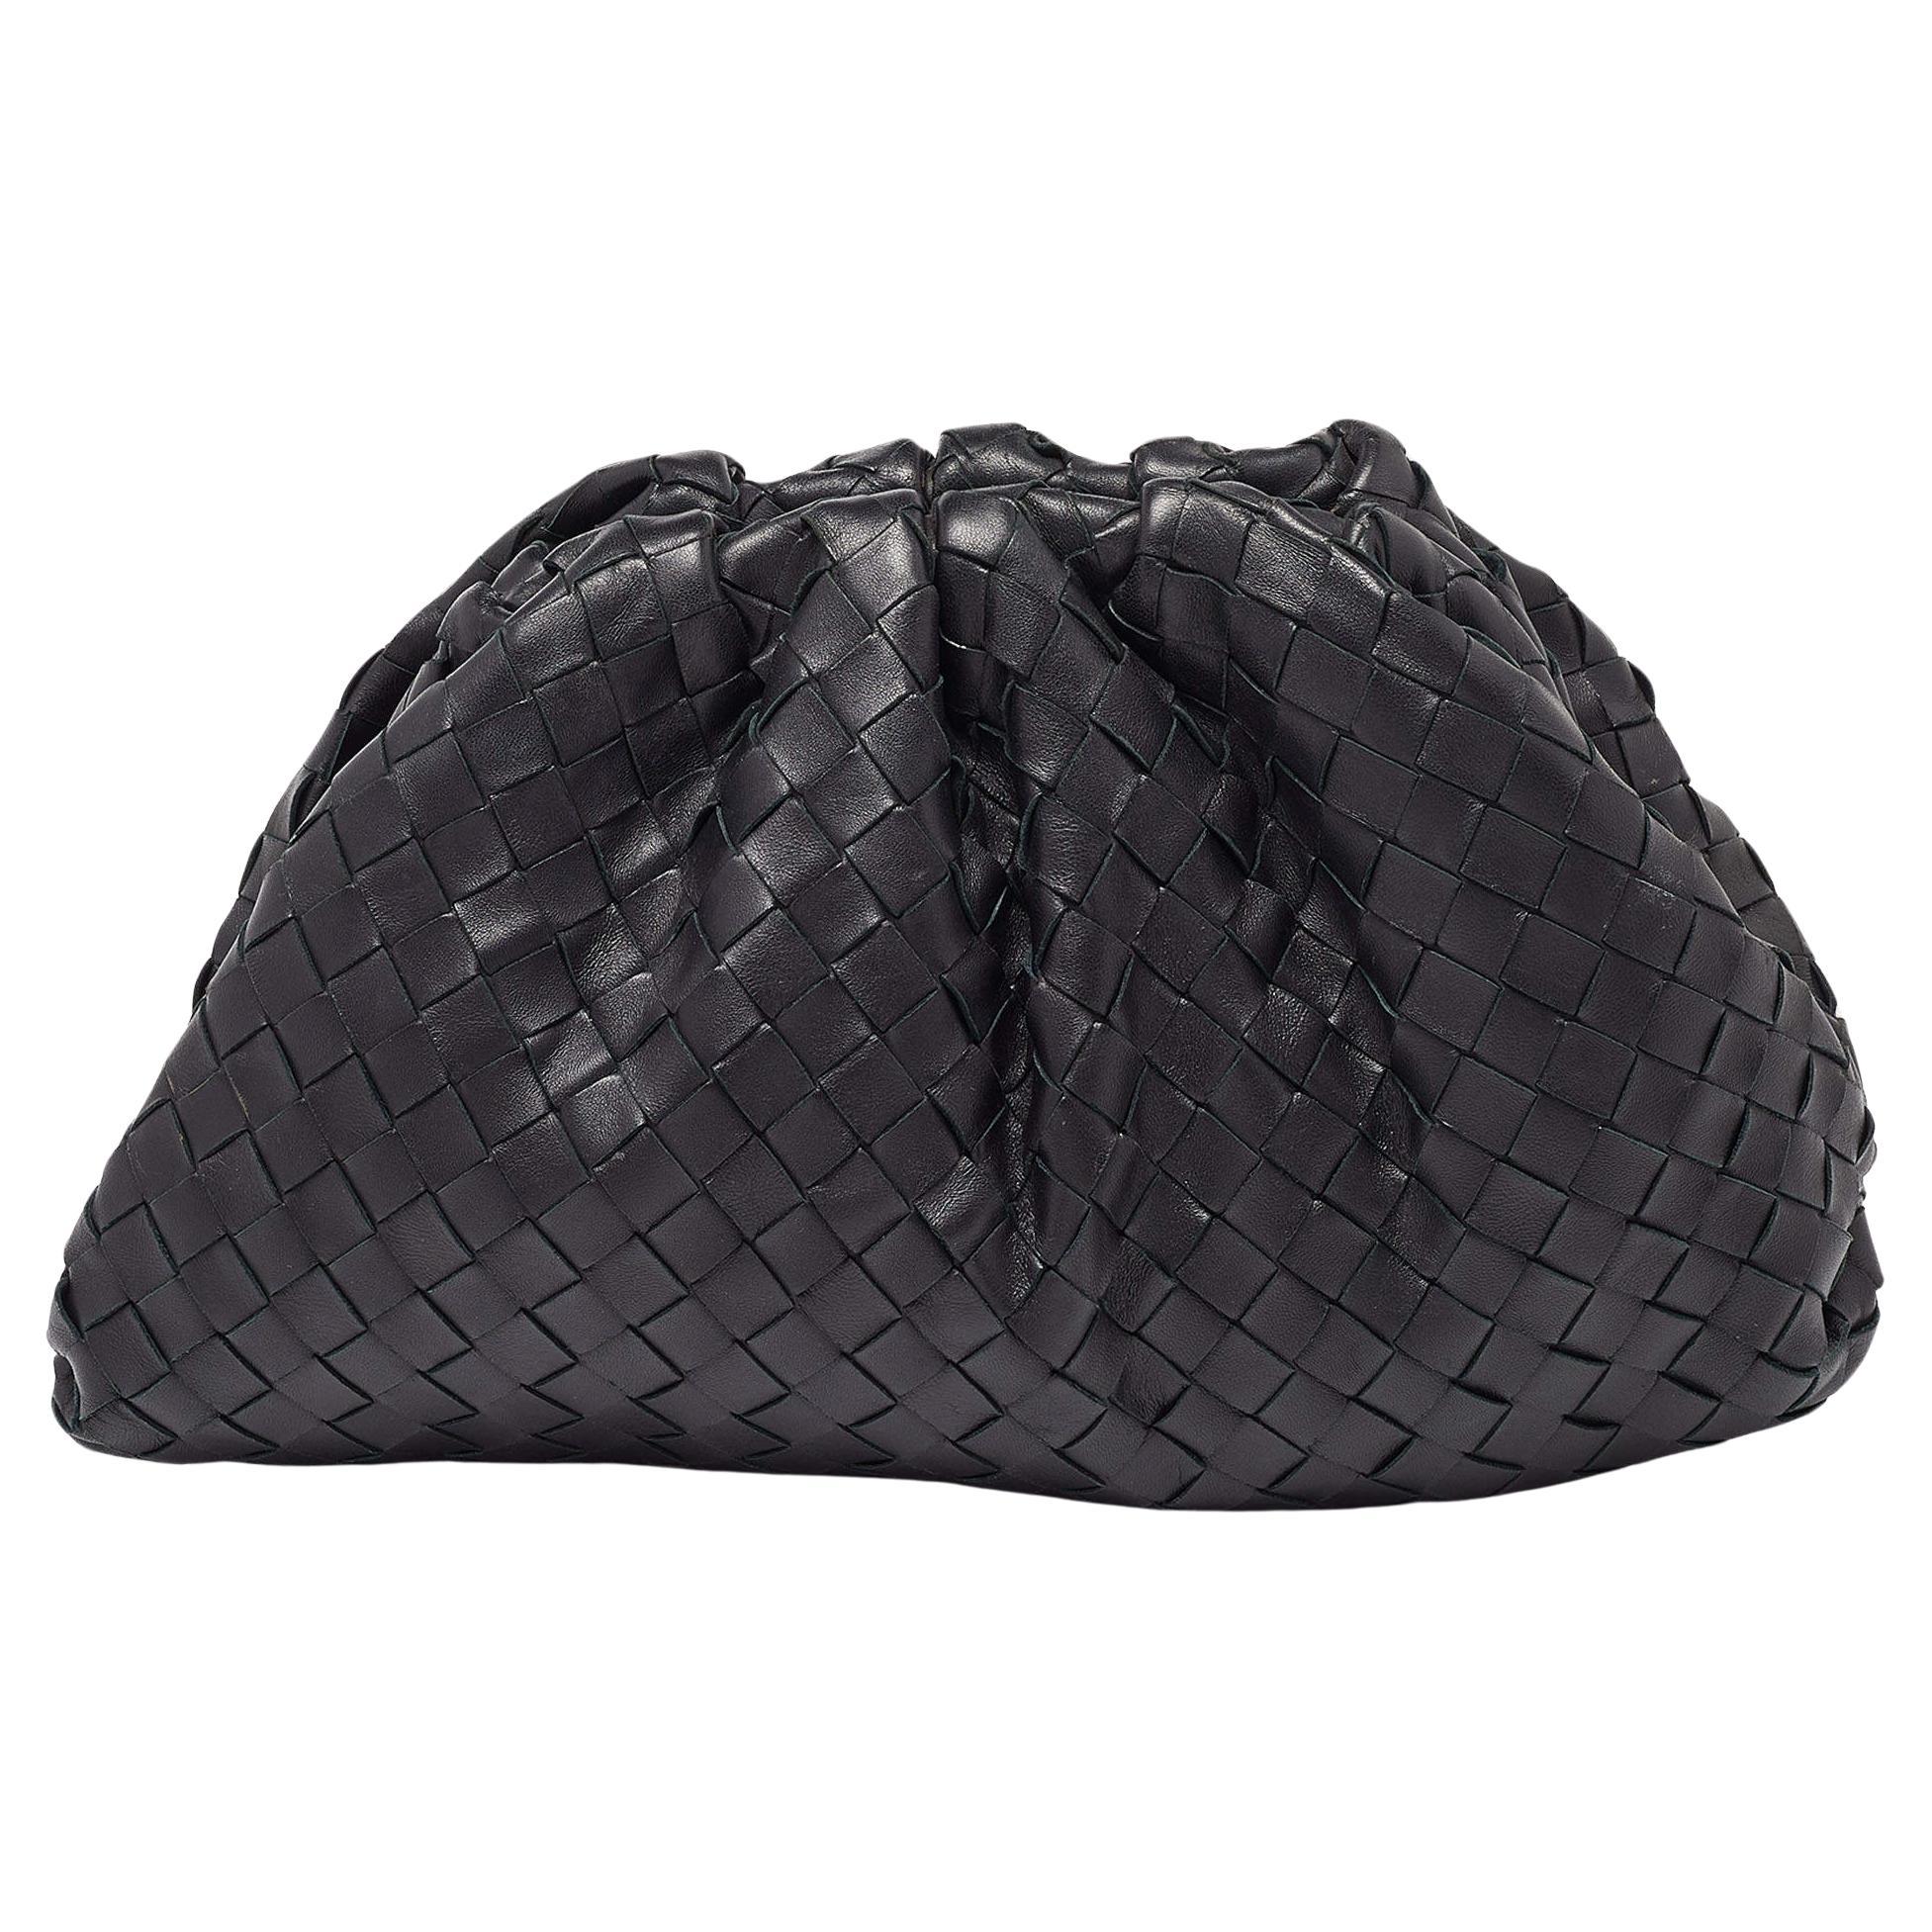 A bag that took the fashion world by storm, Bottega Veneta’s The Pouch clutch reflects Daniel Lee’s distinctive style choices. This version is skillfully made from black leather into an unstructured silhouette, providing ample space. Get ready to